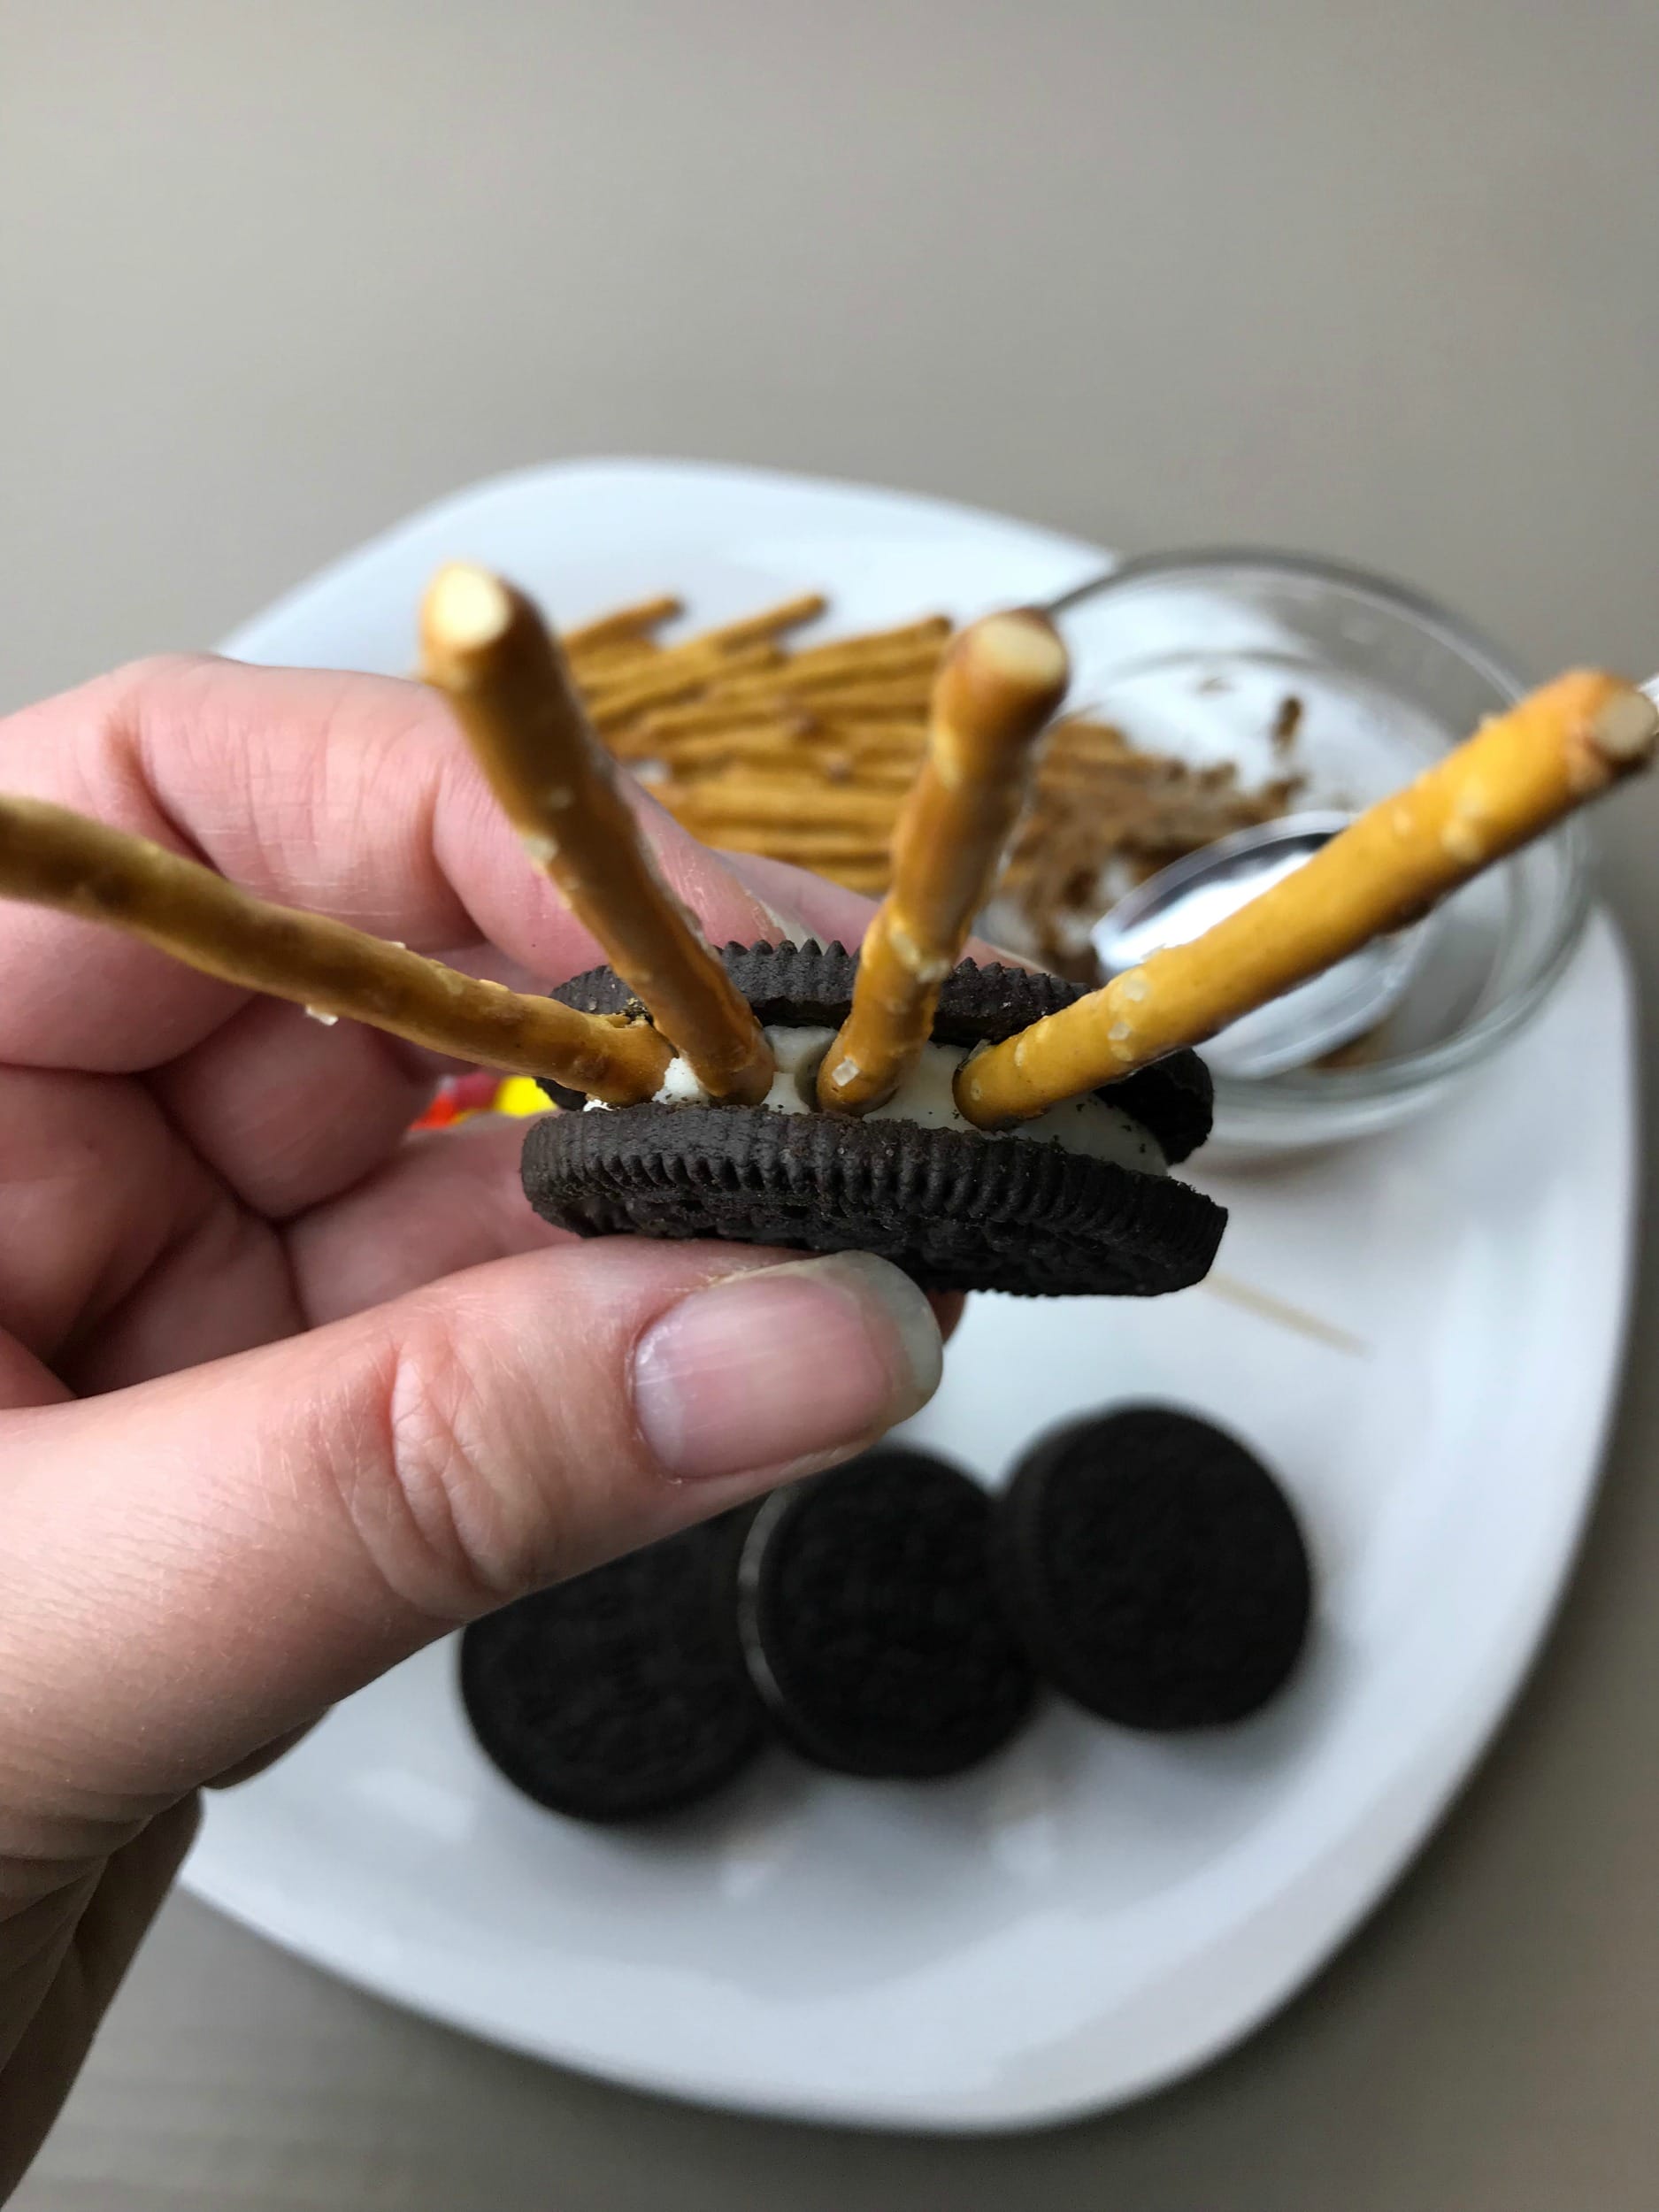 These classic OREO spider cookies are creepy, but not too creepy. A Halloween treat that is a lot of fun for kids to make and eat. 